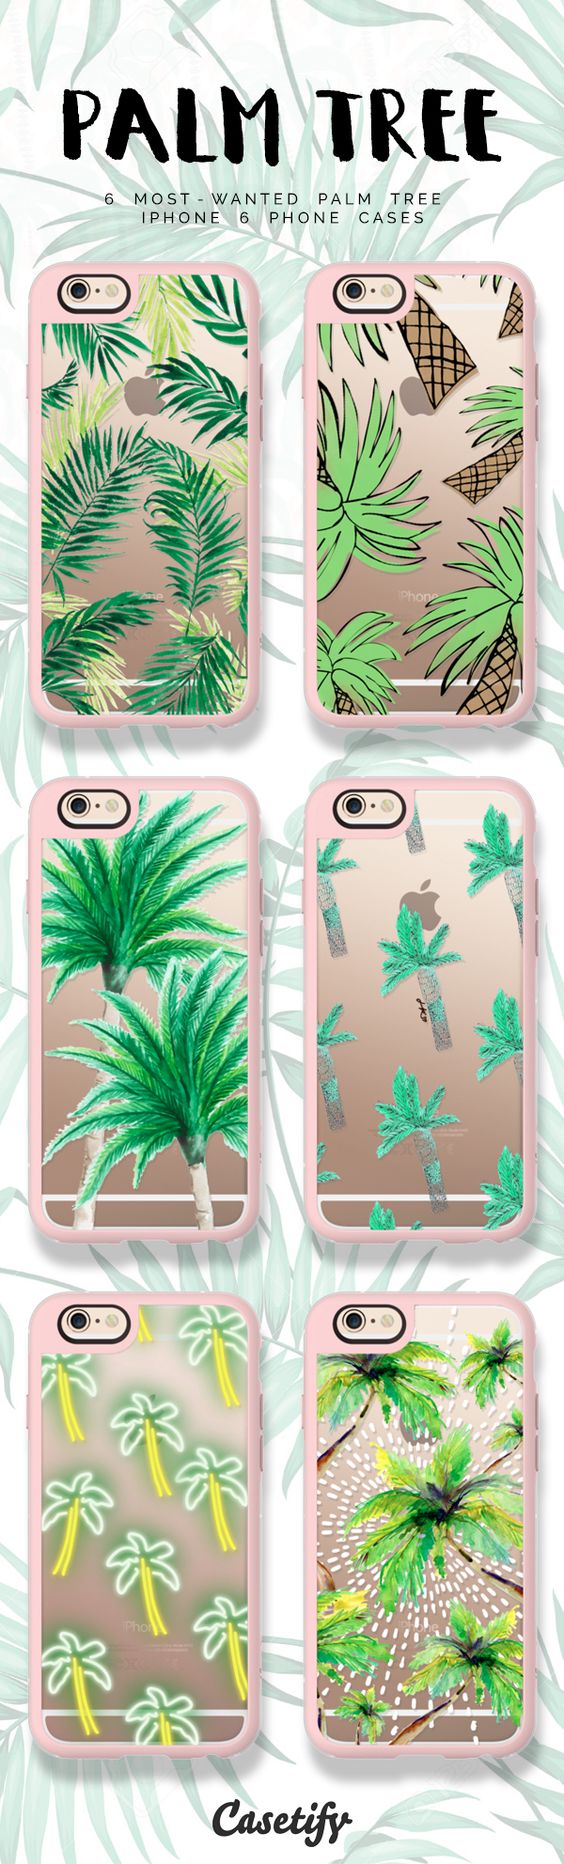 Top 6 palm trees iPhone 6 phone case designs | Click through to see more protective iPhone phone case ideas   #gardenart | @Casetify